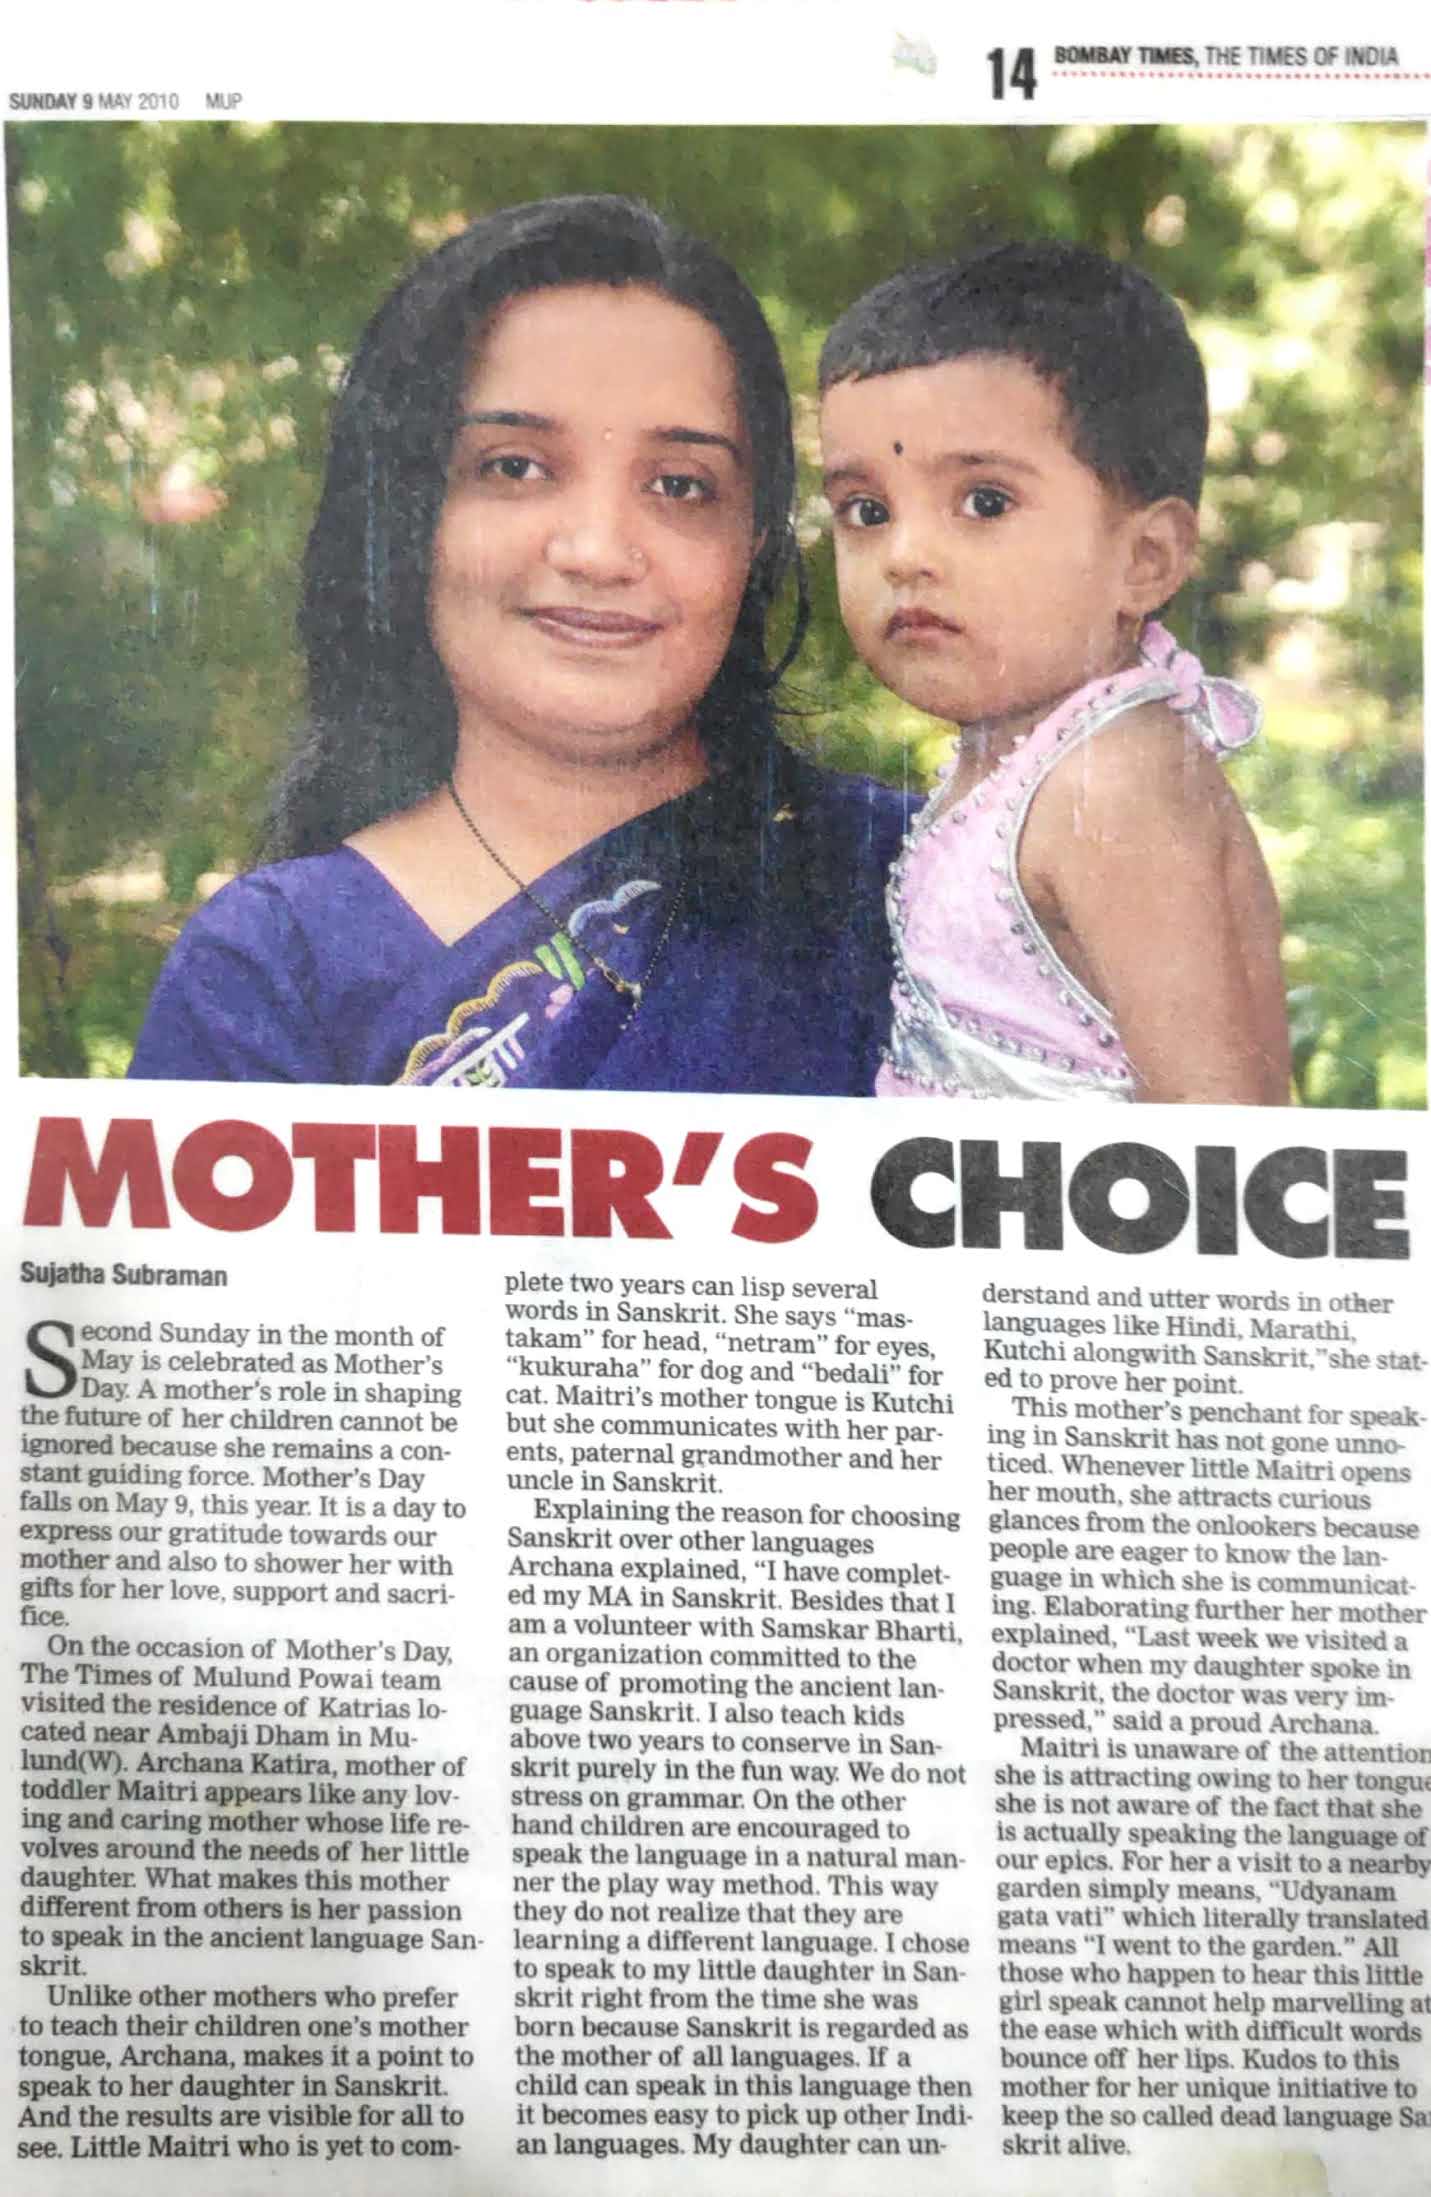 Our founder Archana Katira being recognised by Hindustan Times